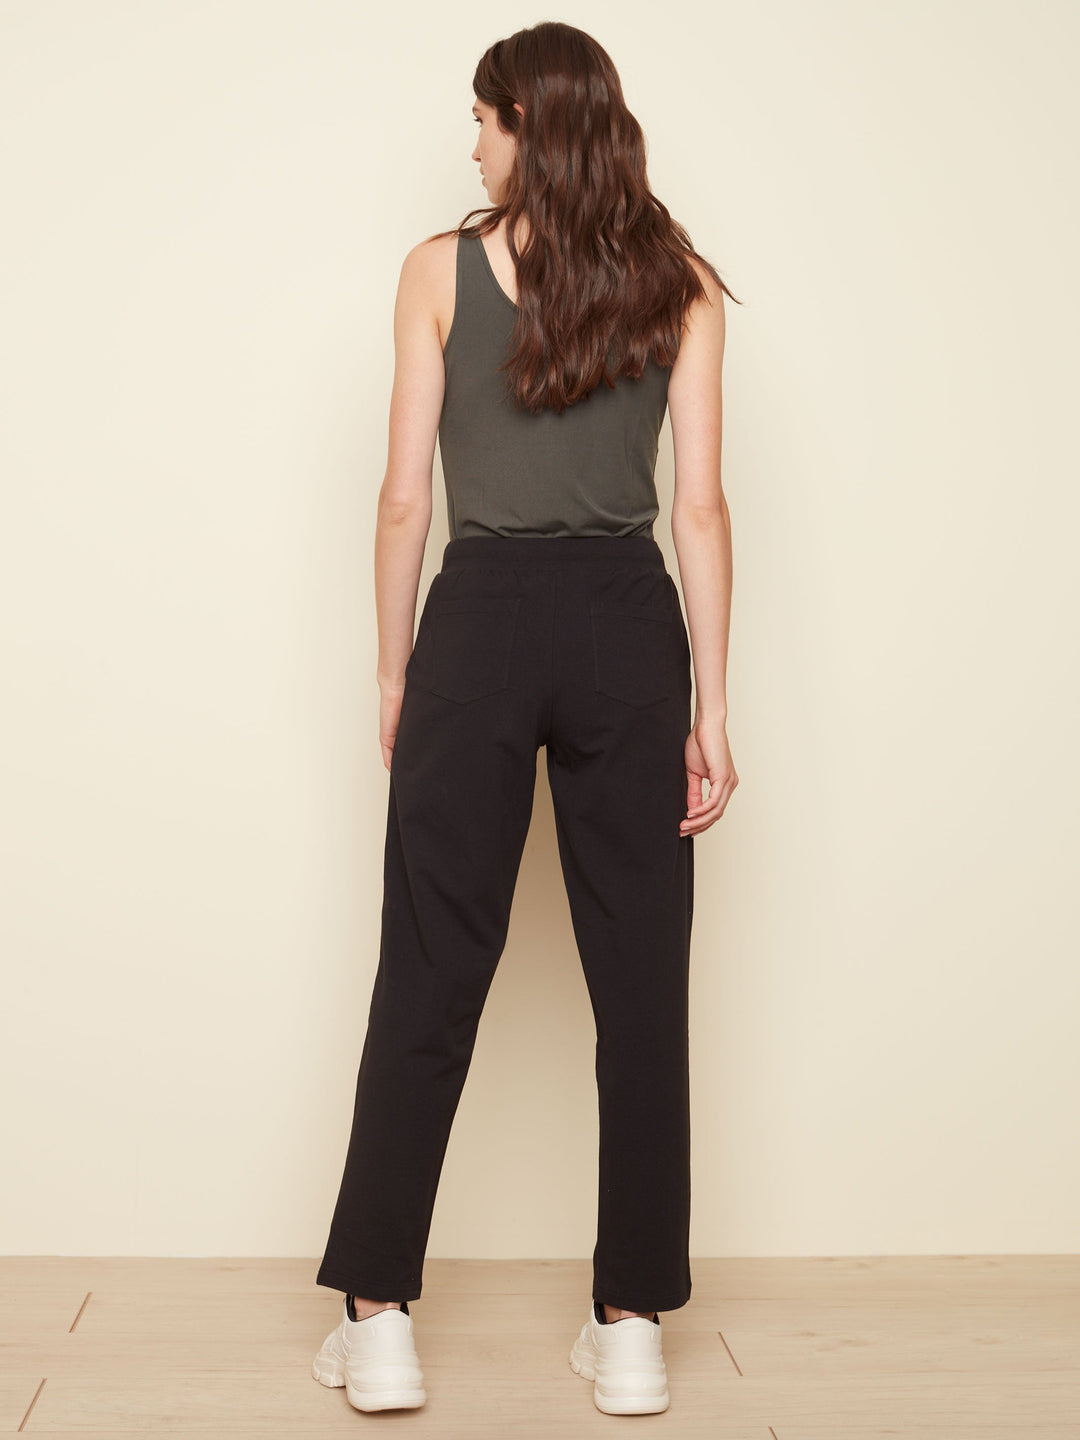 Pull on drawstring french terry pants